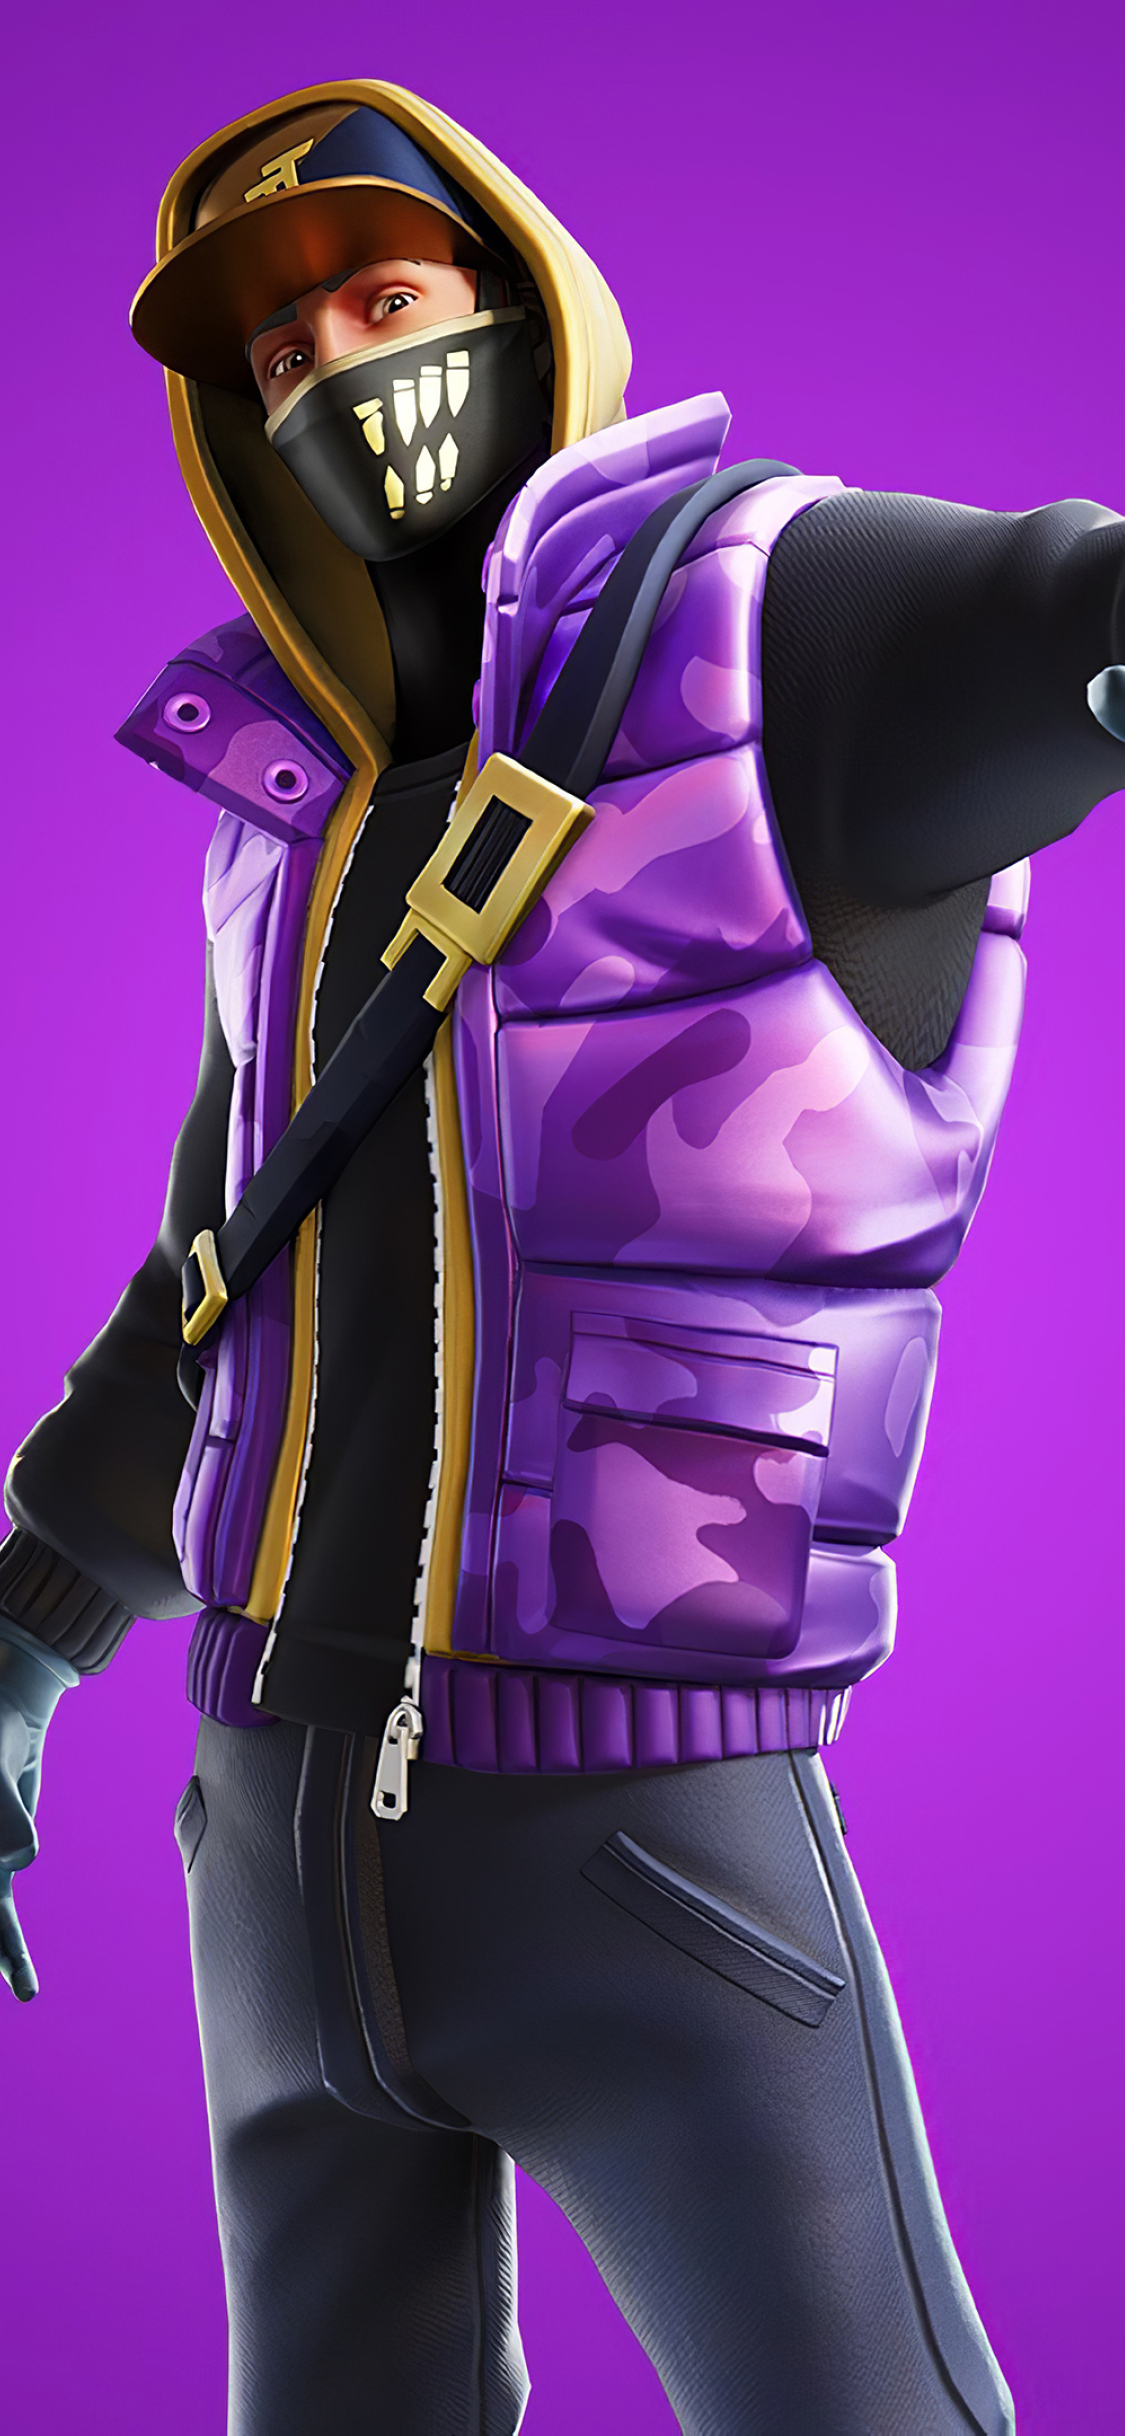 1125x2436 Street Striker 4k Skin From Fortnite Chapter 2 Iphone Xs Iphone 10 Iphone X Wallpaper Hd Games 4k Wallpapers Images Photos And Background Wallpapers Den